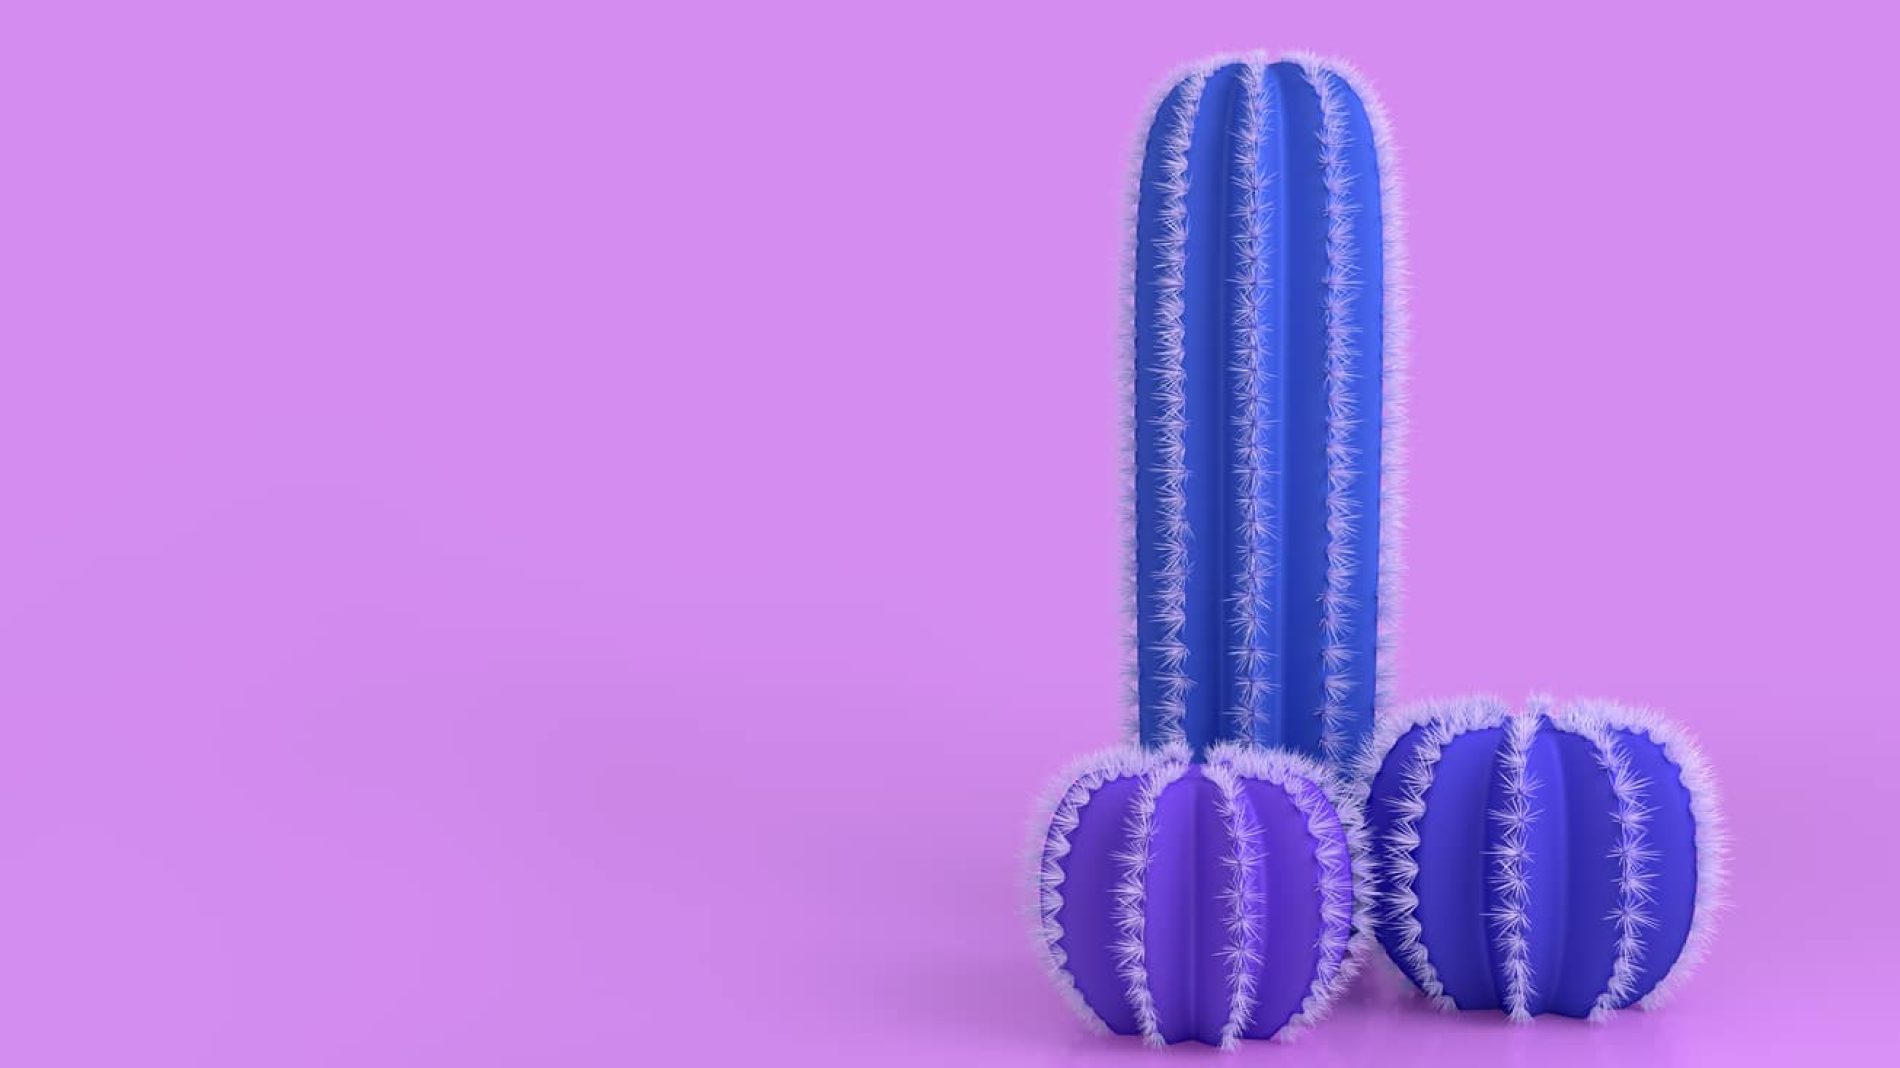 Abstract concept on the topic of the male penis. Three different cacti with thorns on a bright colored pastel background as a concept of infertility and abstinence. 3d illustration.